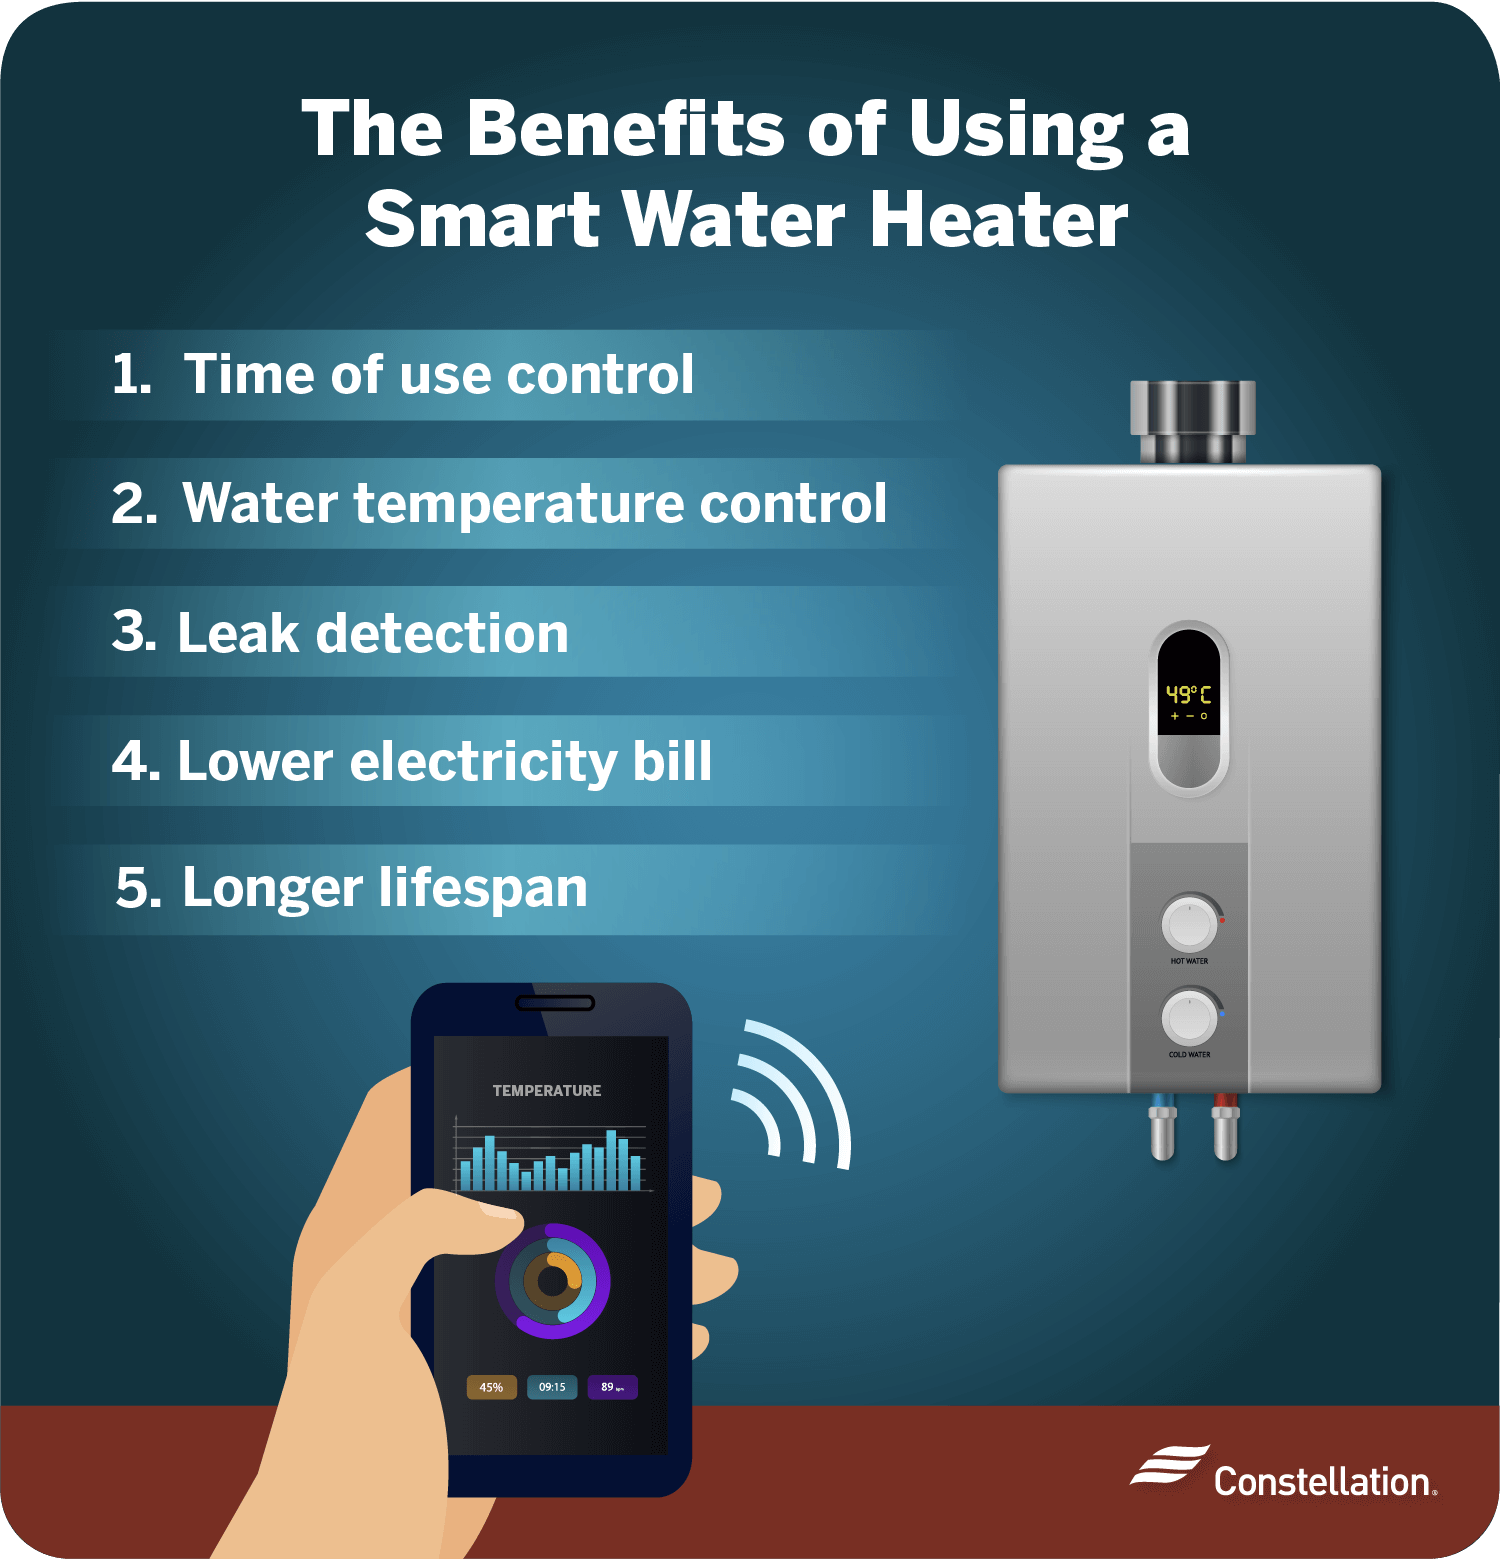 What are the benefits of using a smart water heater?